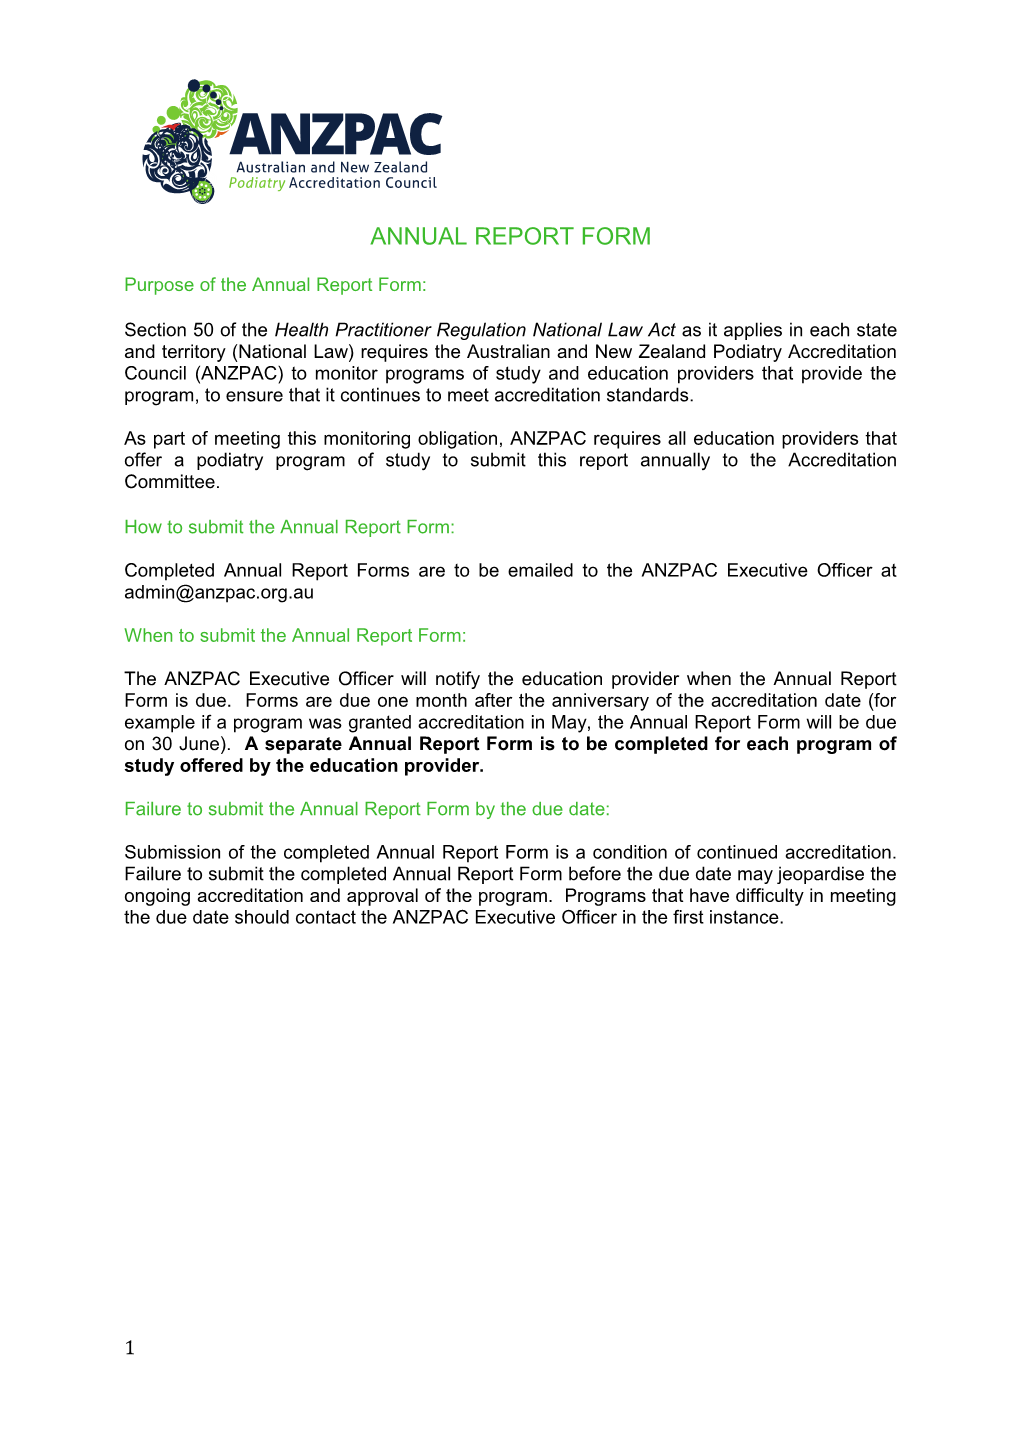 Purpose of the Annual Report Form